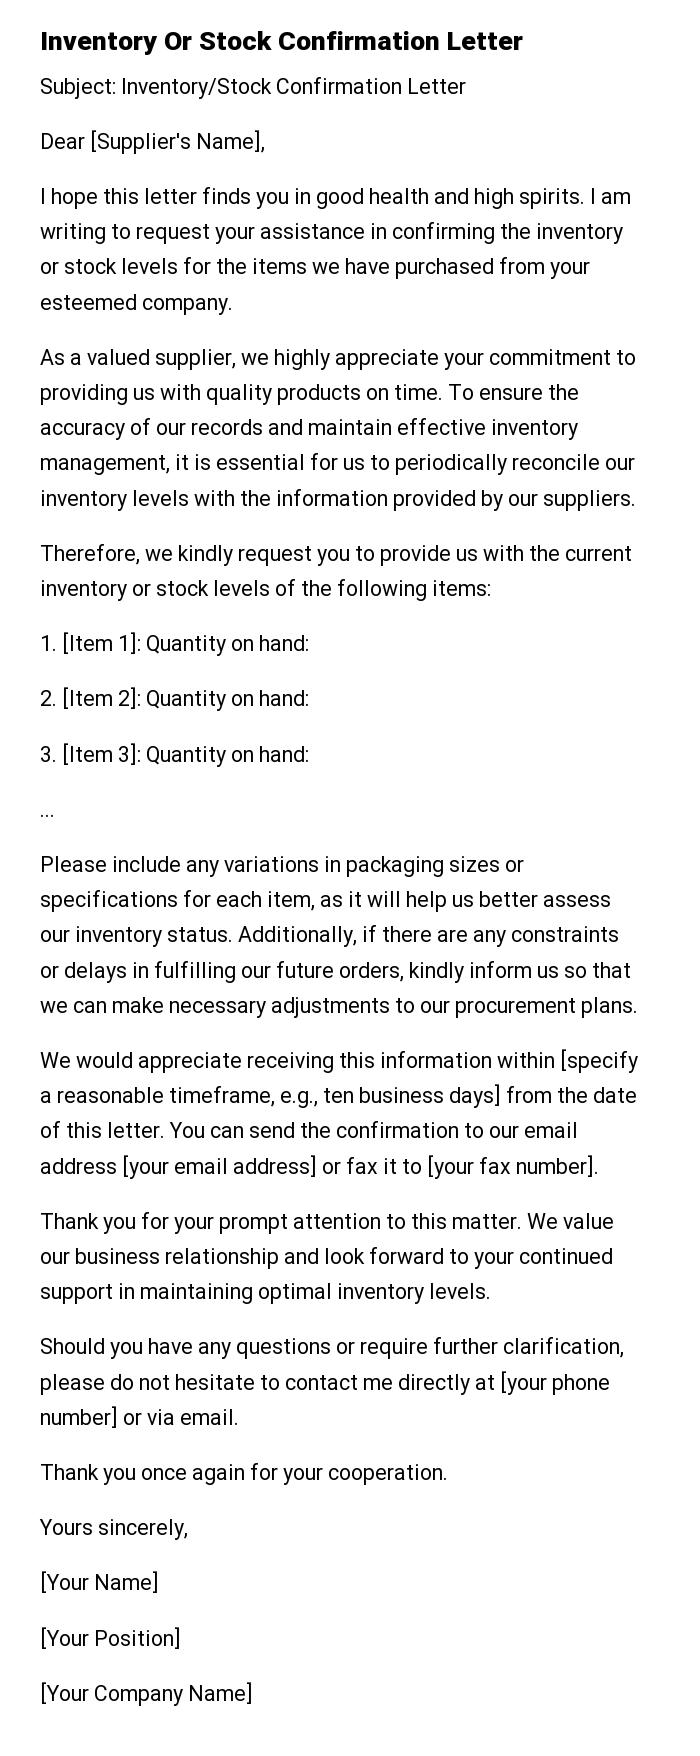 Inventory Or Stock Confirmation Letter